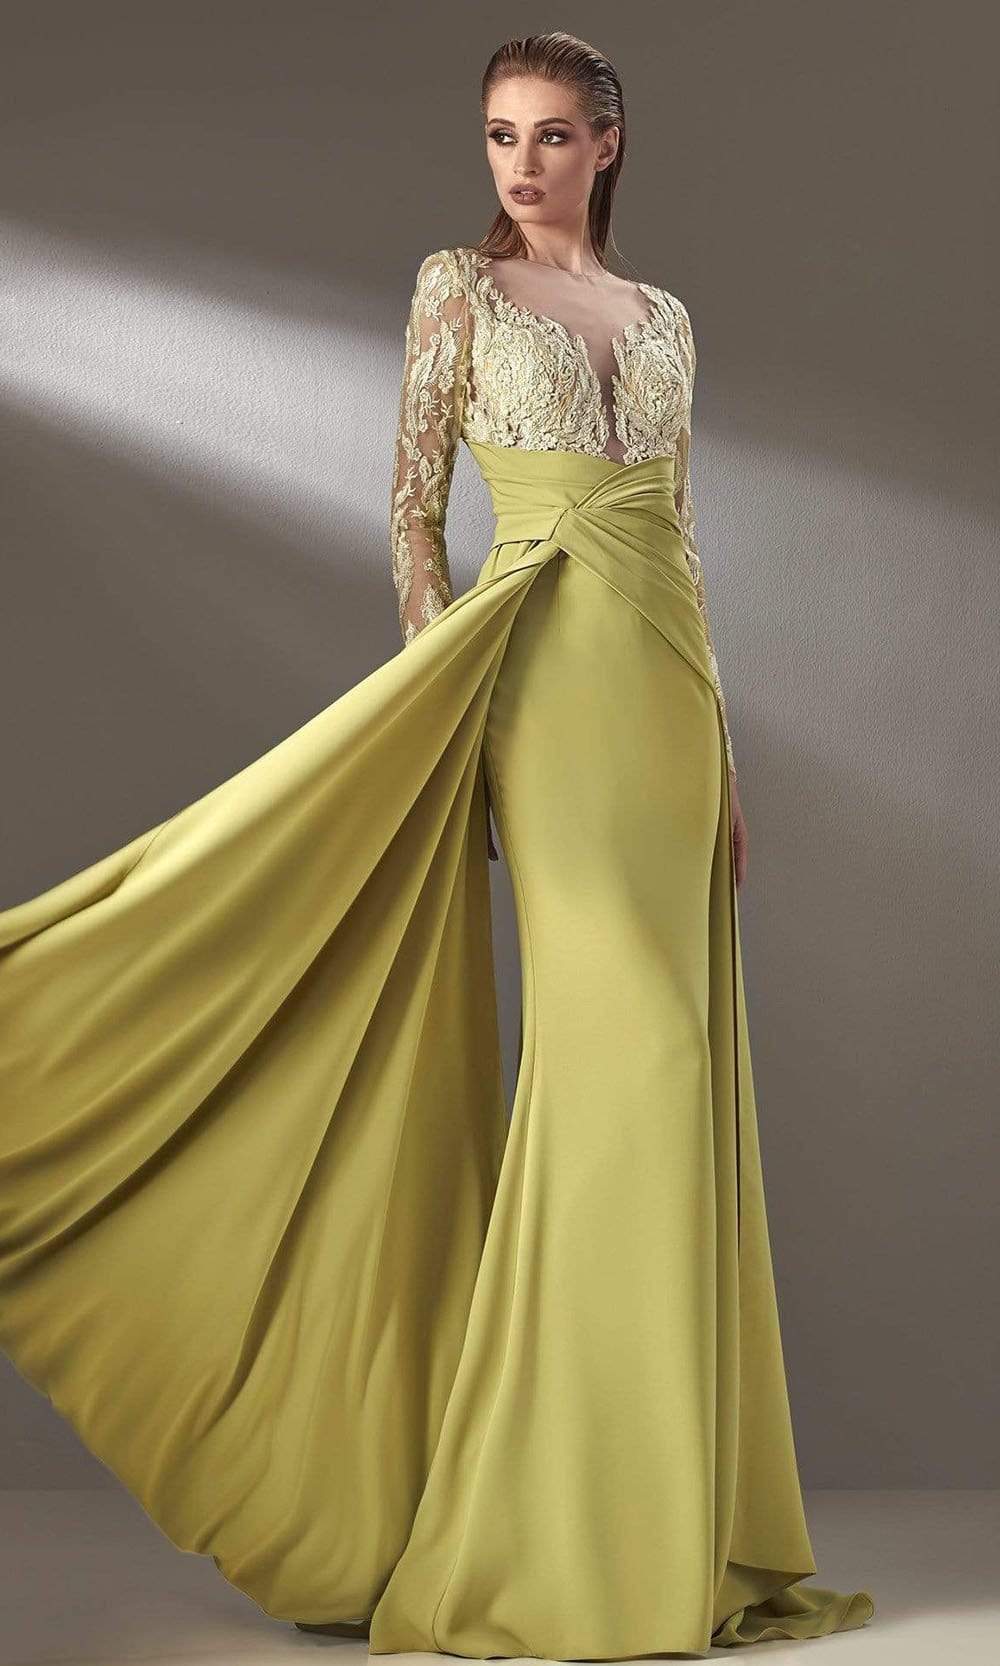 MNM Couture - K3893 Long Sleeves Sheath Evening Dress
